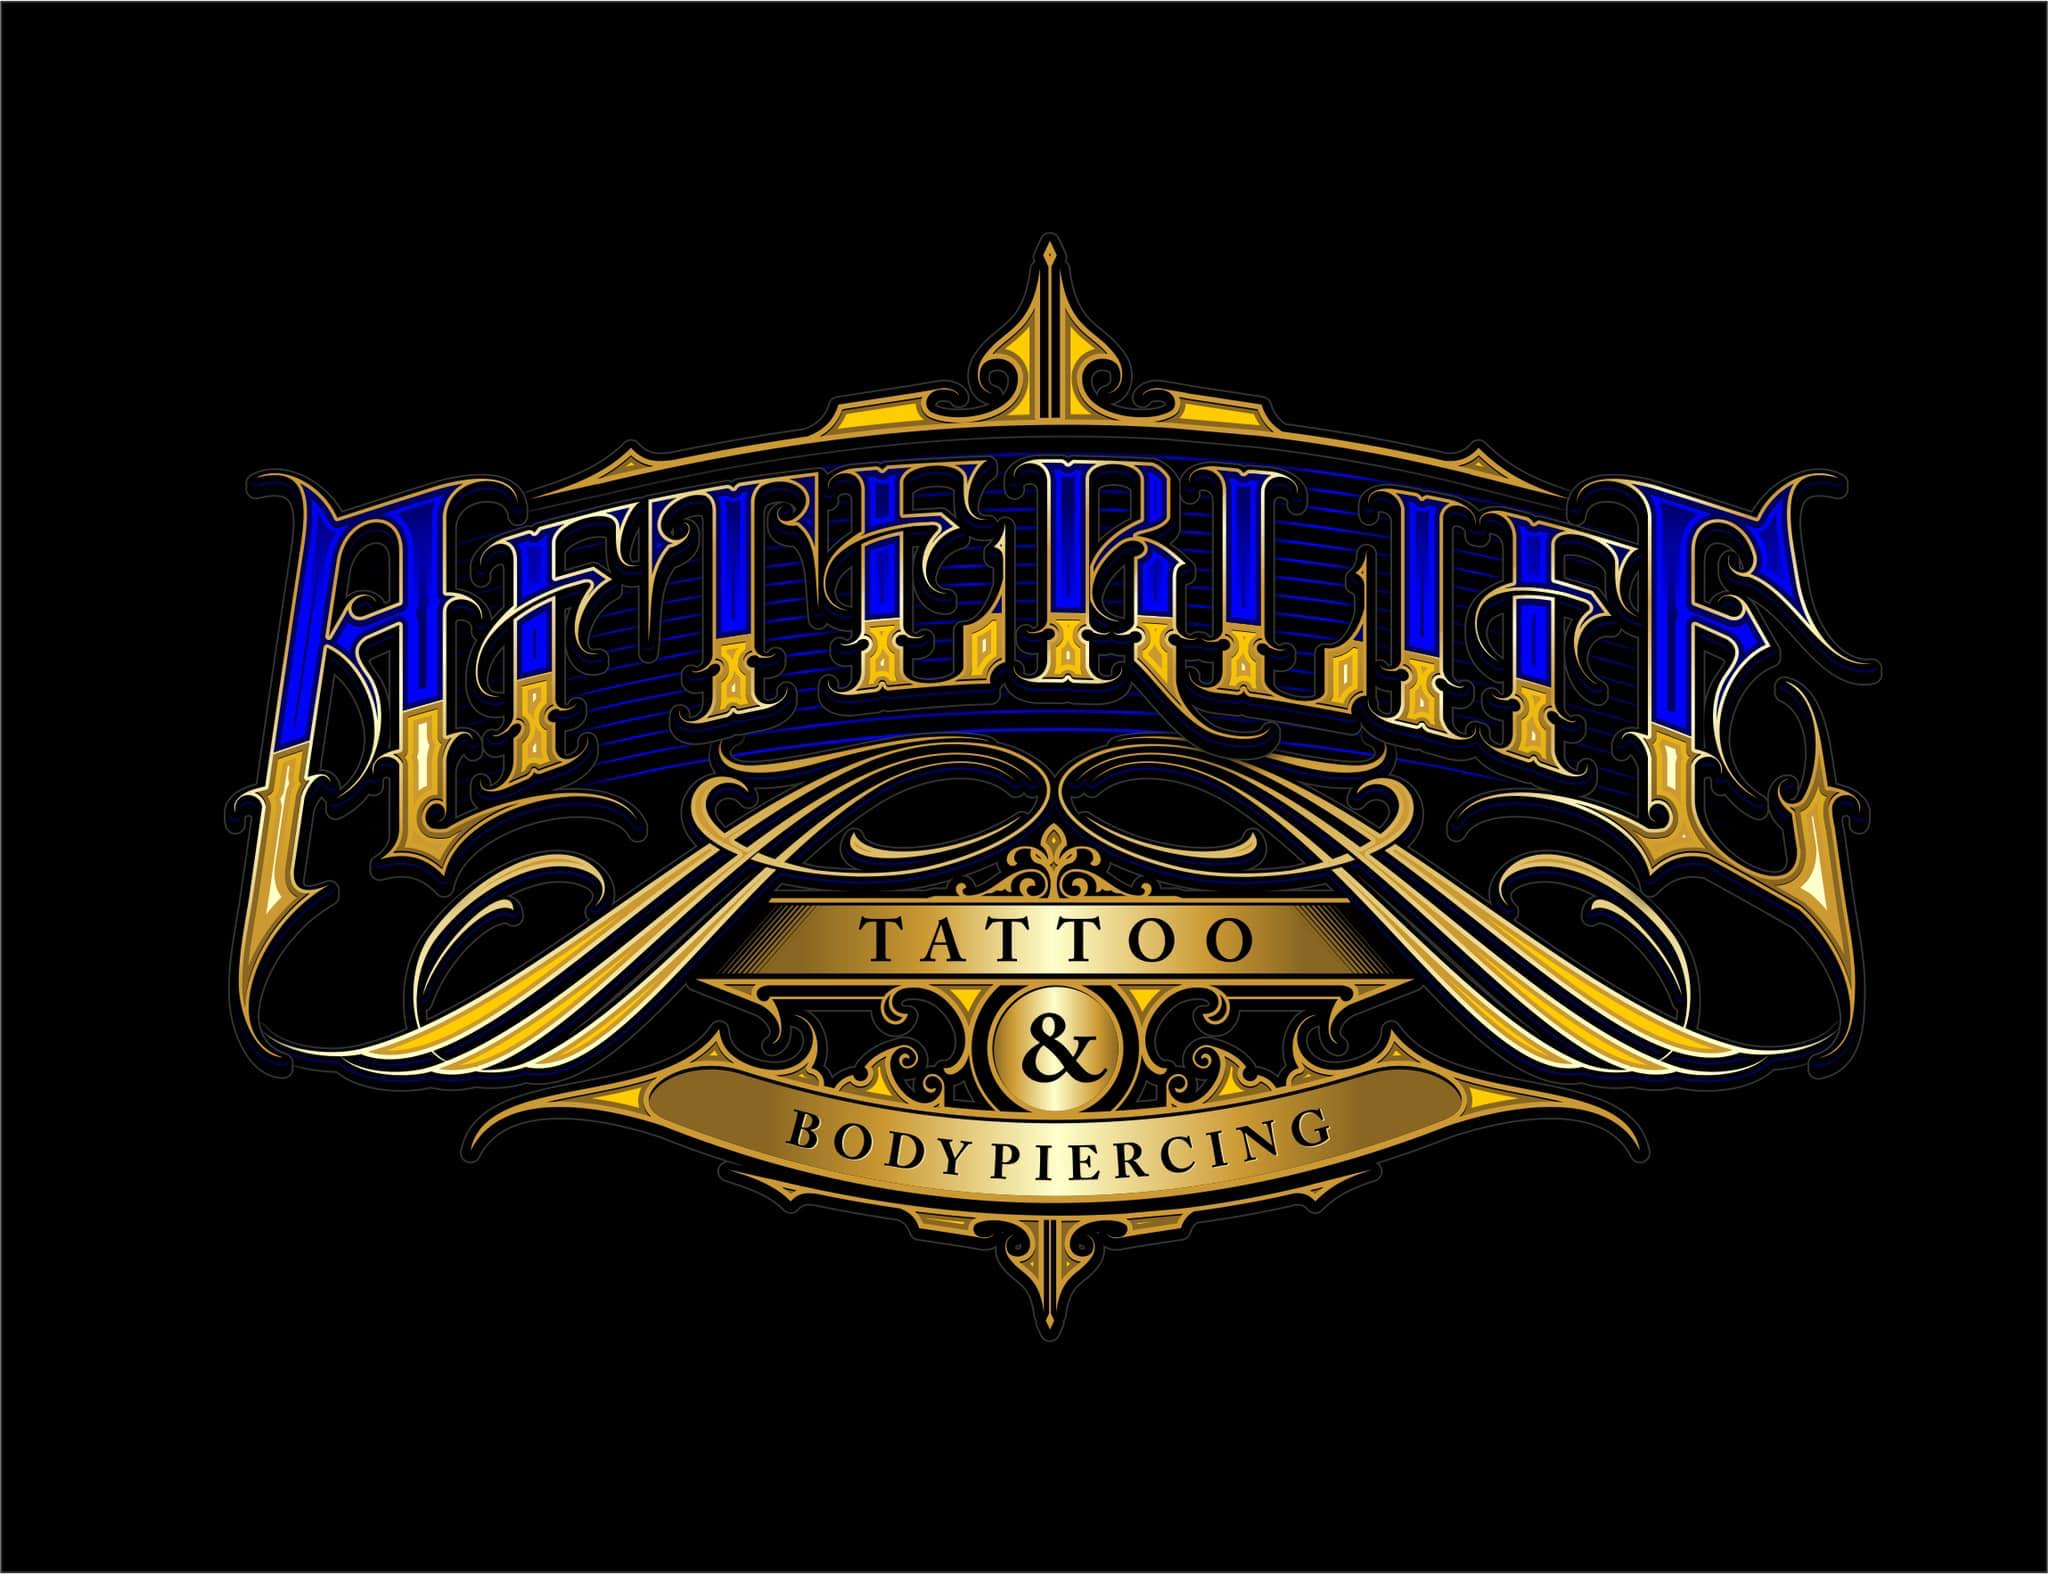 Afterlife Tattoo & Body Piercing